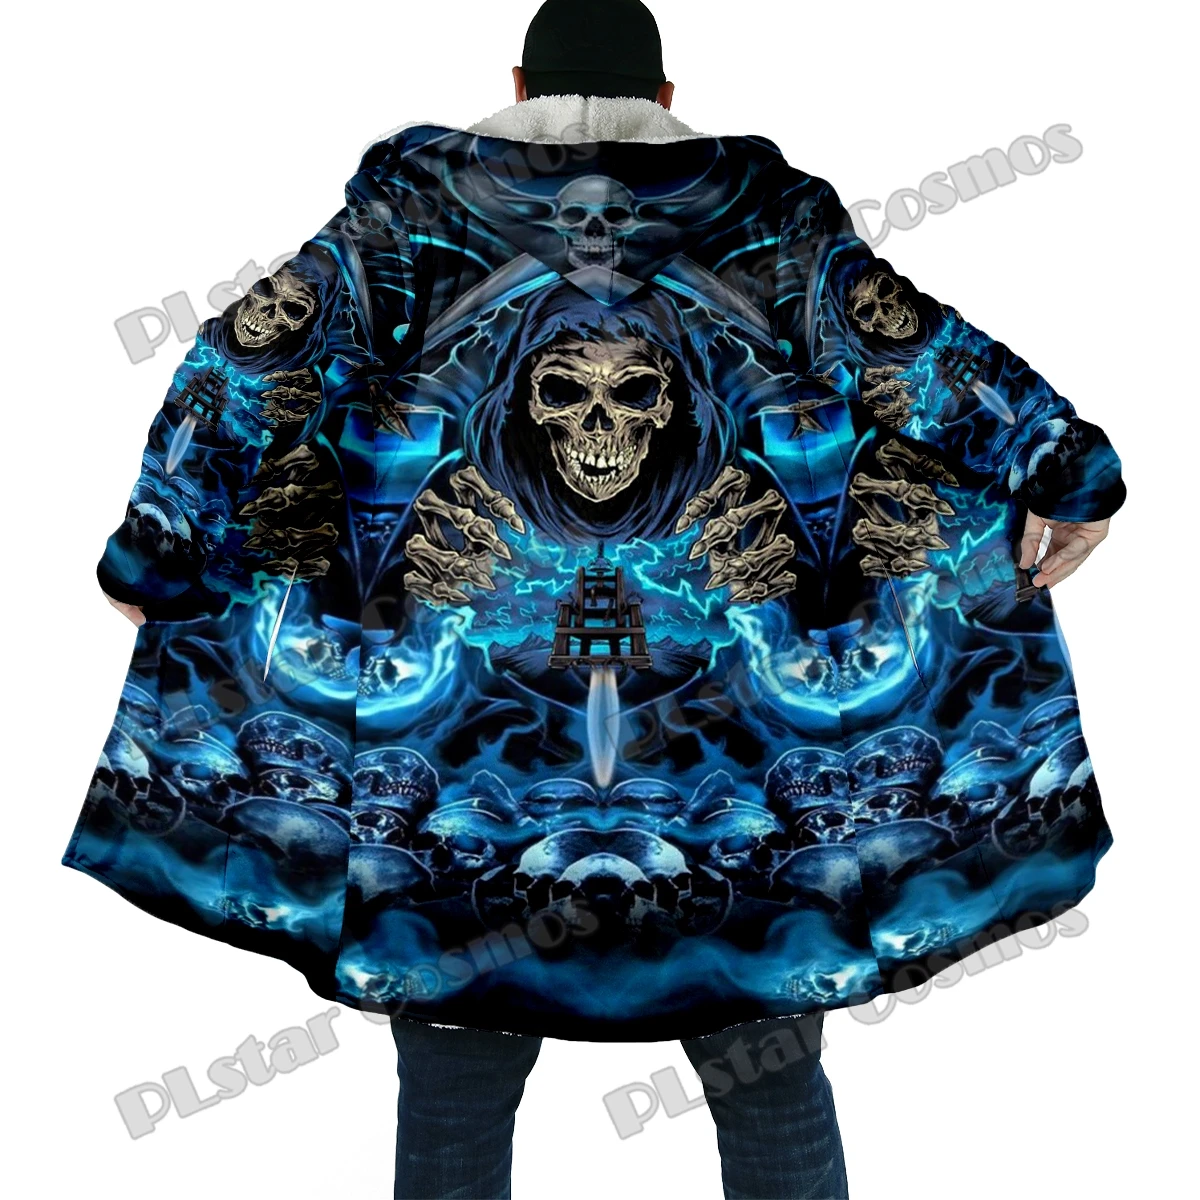 Winter Fashion Men's cloak Funny Skull Pattern 3D All Over Printed Thick Fleece Hooded Cloak Unisex Casual Warm Cape Coat DP48